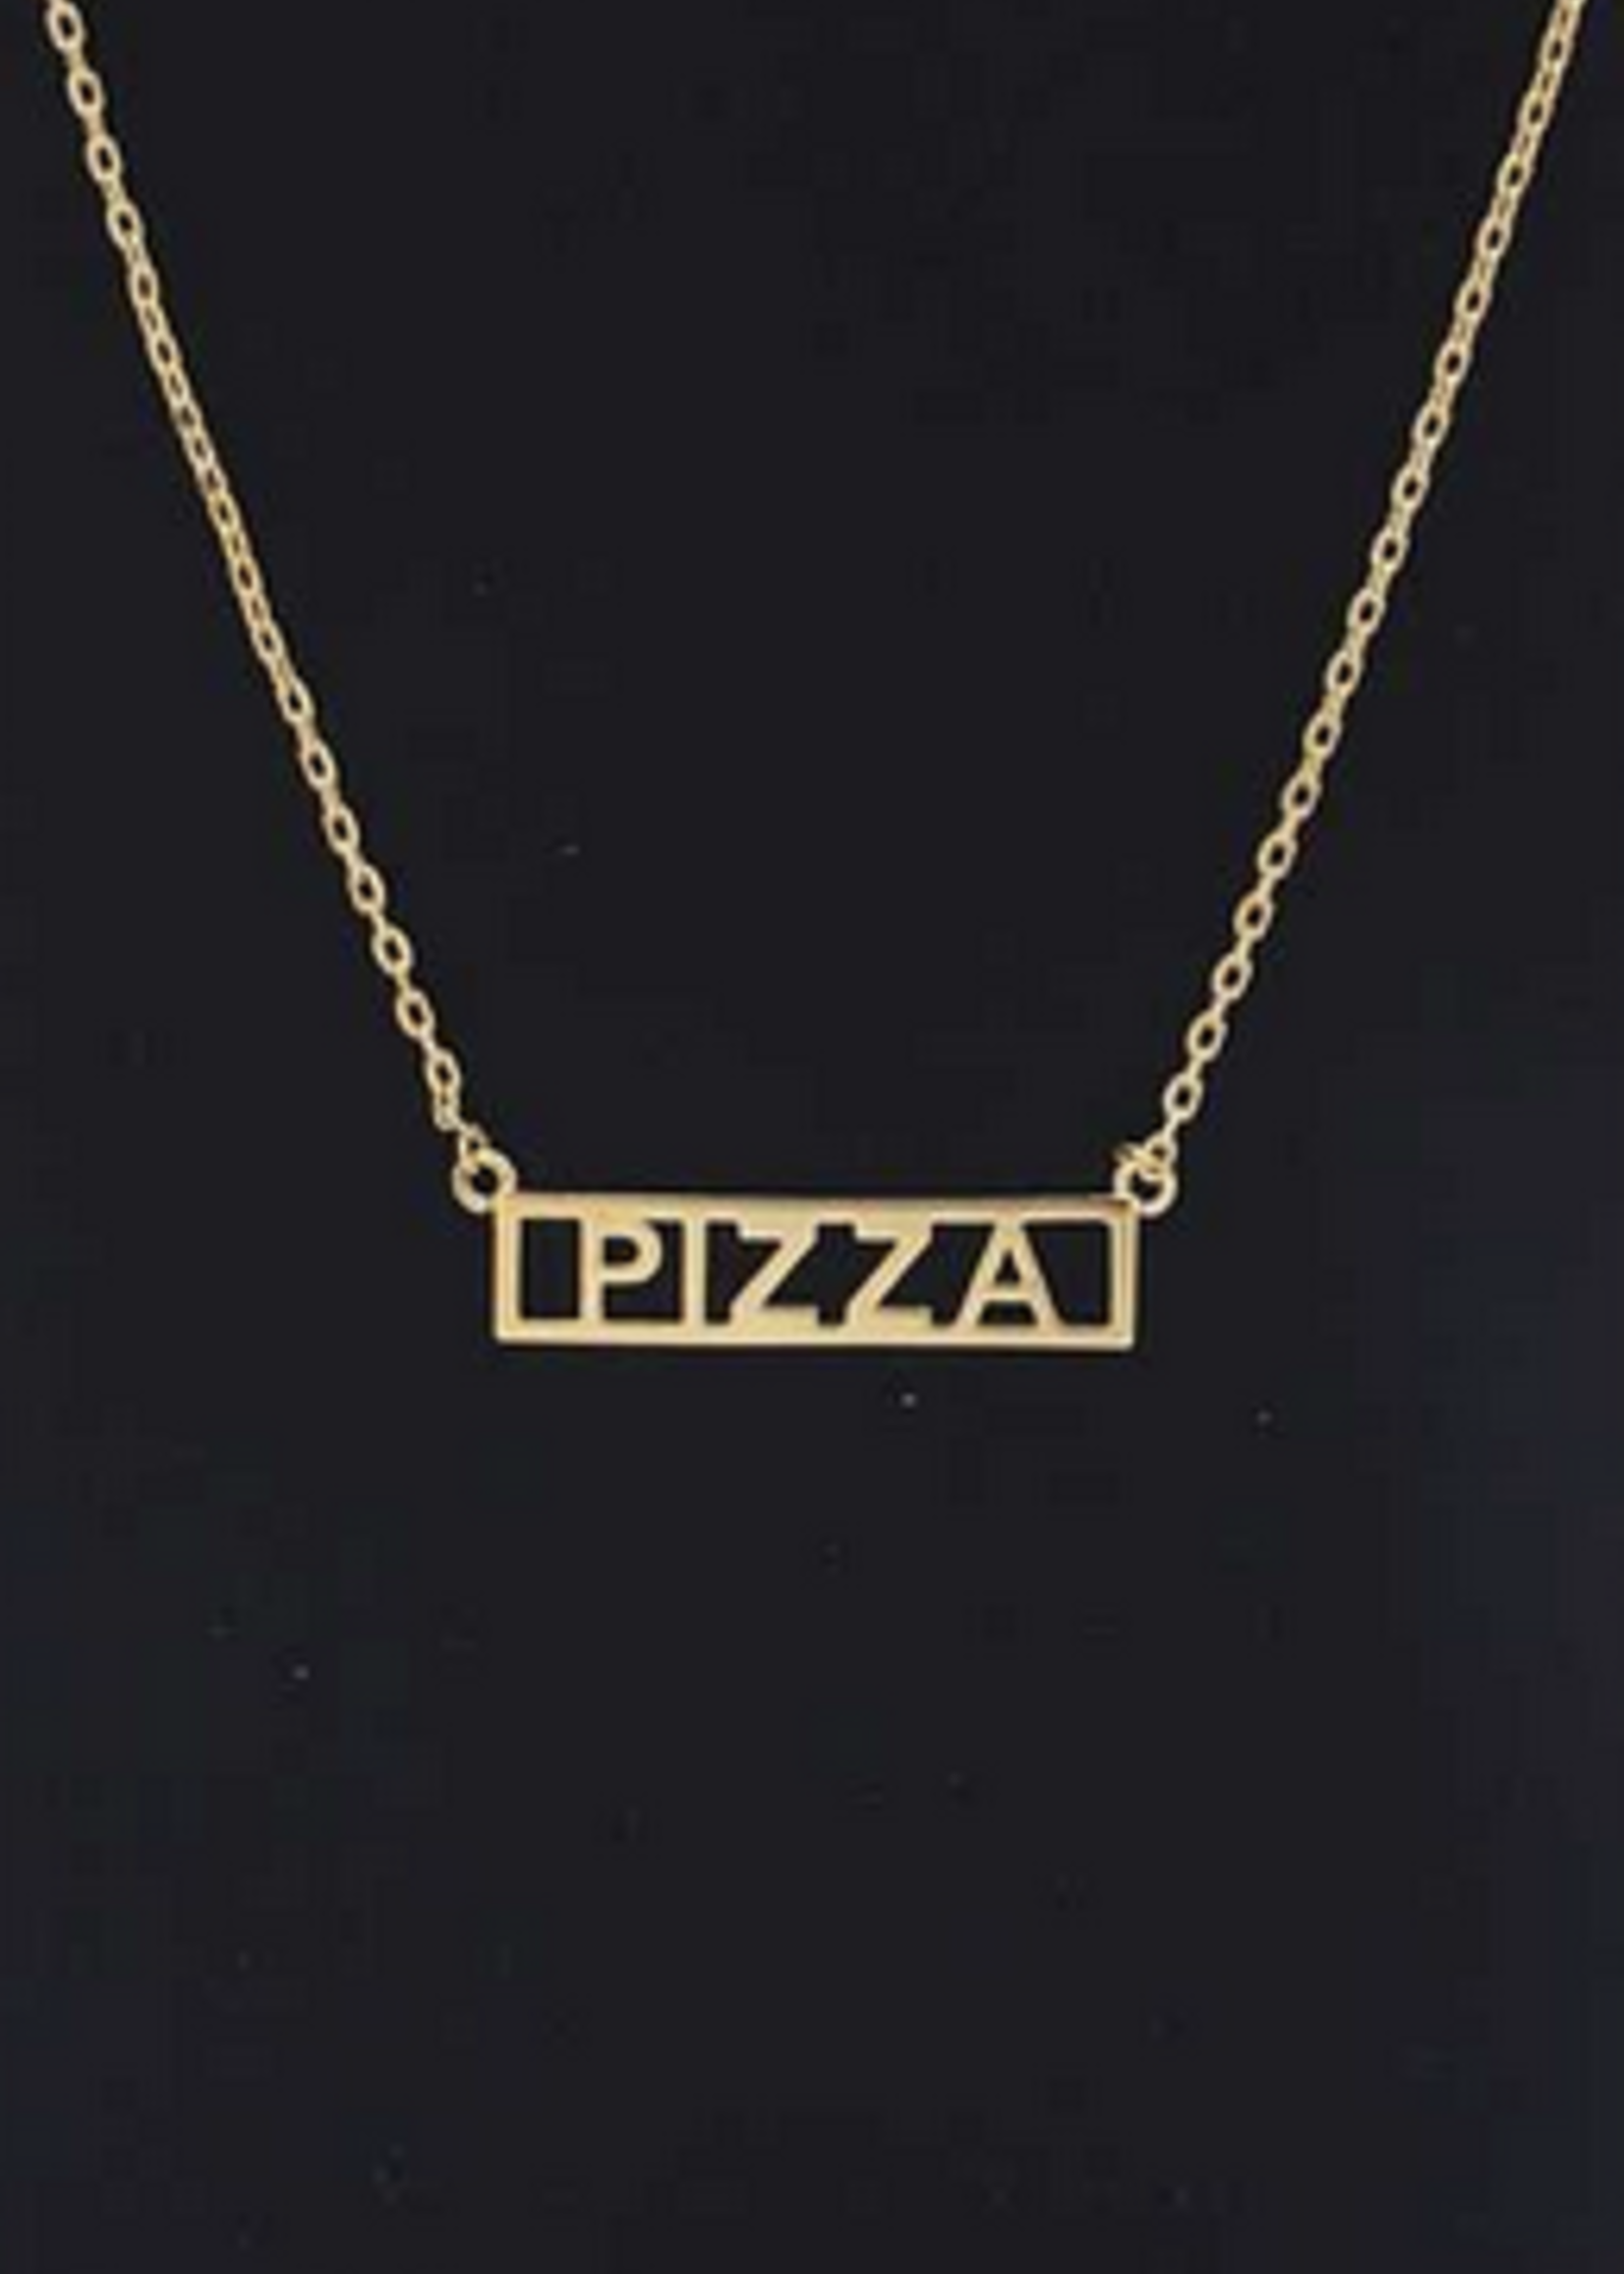 pizza necklace